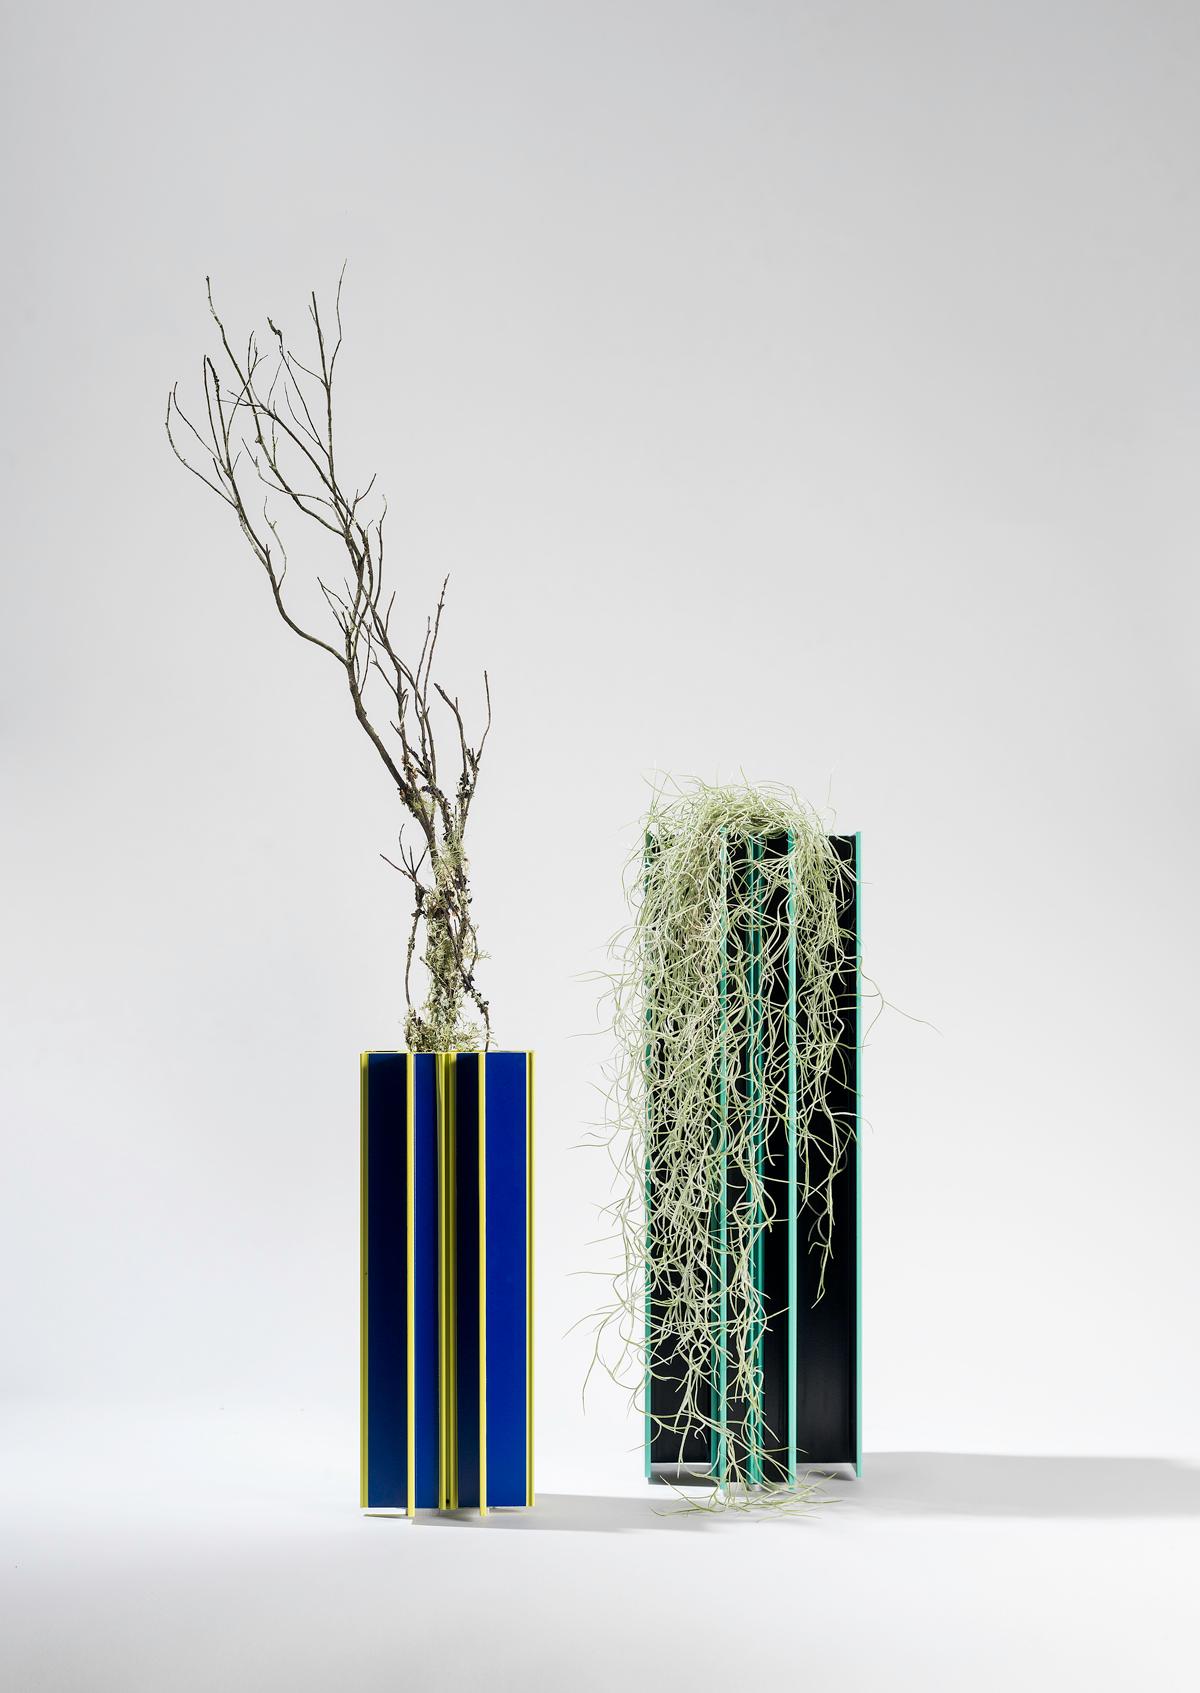 For the BD Barcelona's 'Remix Project (Volume 3)', Jorge Penadés' 'Piscis' series makes use of extruded aluminium parts salvaged from old lamps and shelves to create a collection of vibrant vases. Limited edition and part of a series of six, 'Piscis